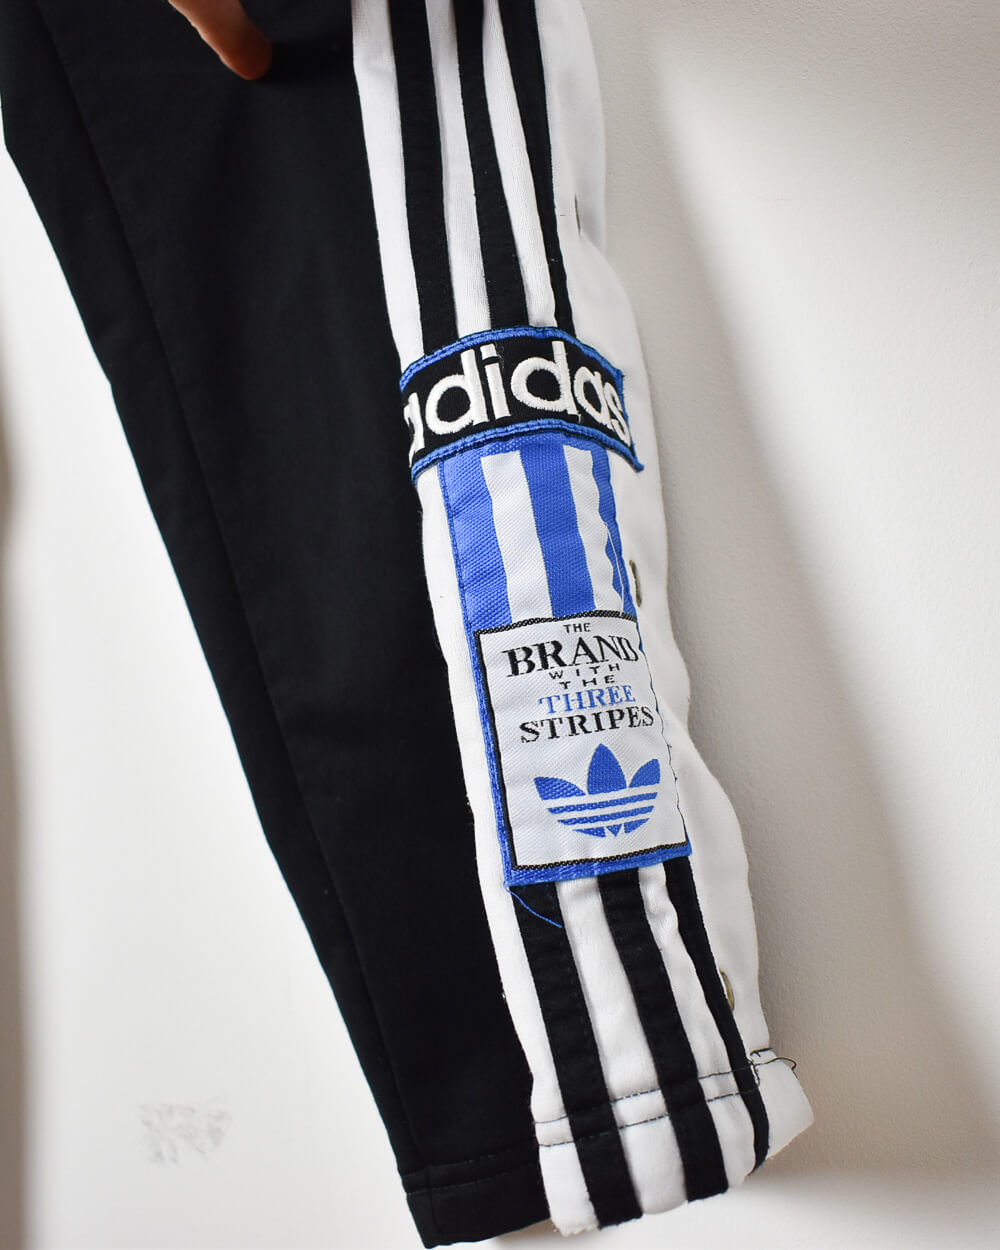 Black Adidas The Brand With Three Stripes Tracksuit Bottoms - W34 L28